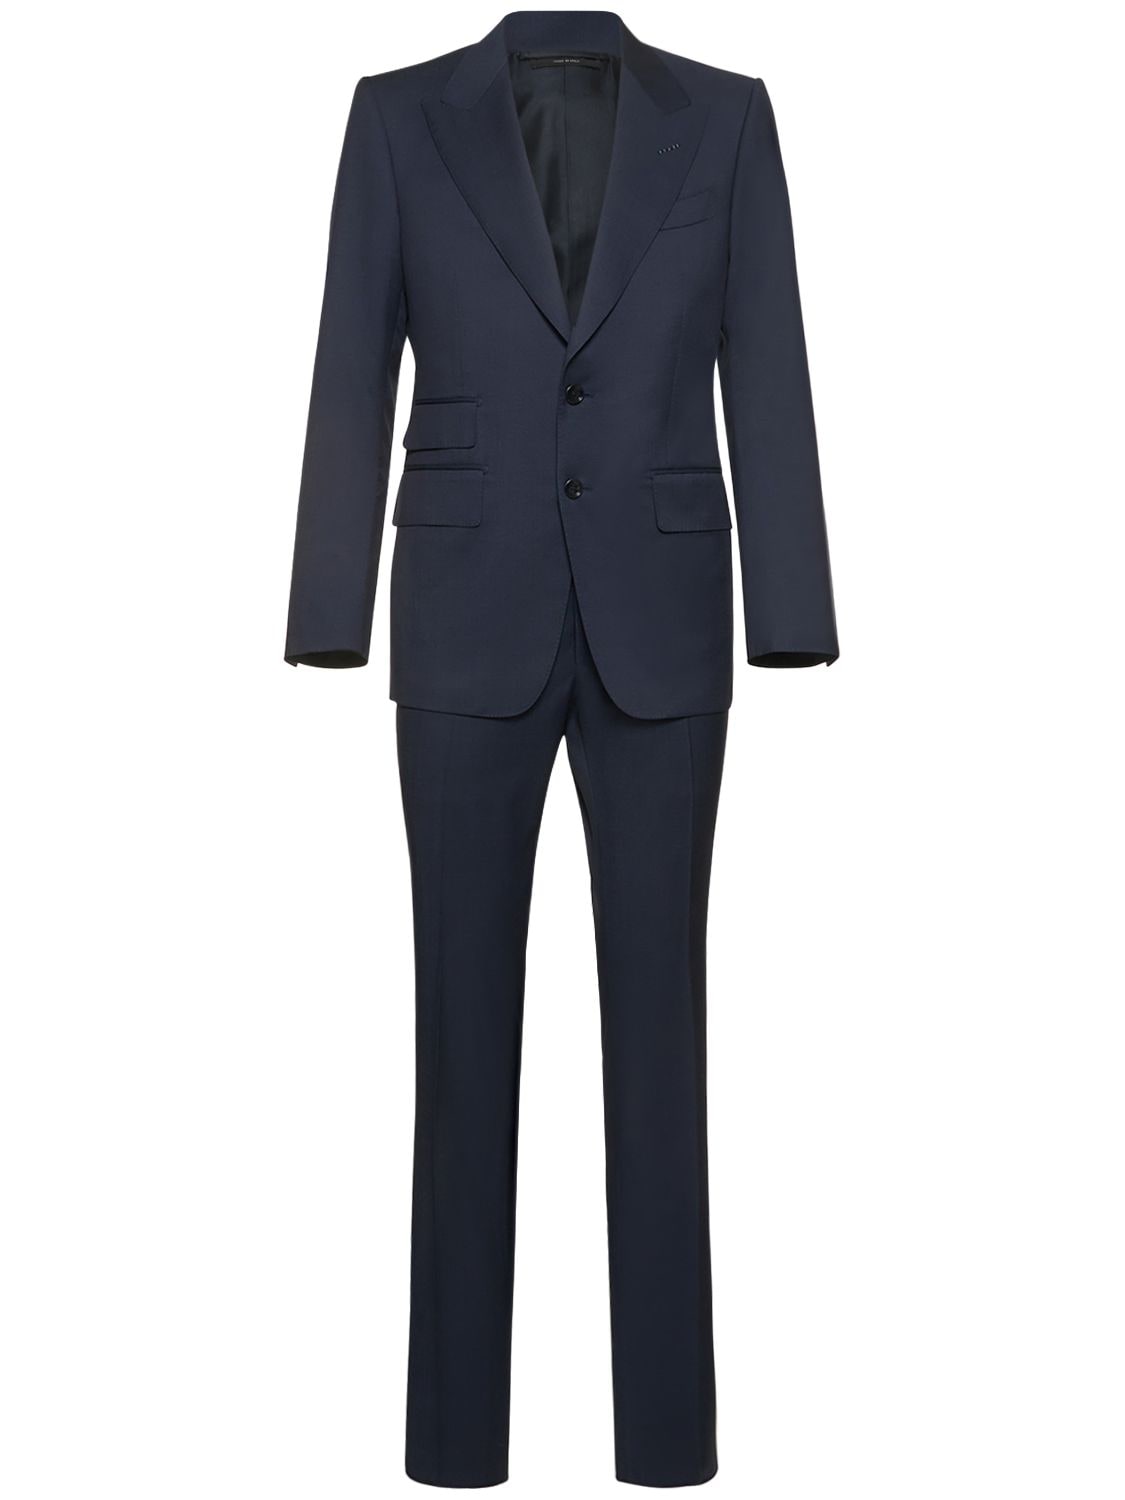 Tom Ford Shelton Micro Pin Point Suit In Navy | ModeSens